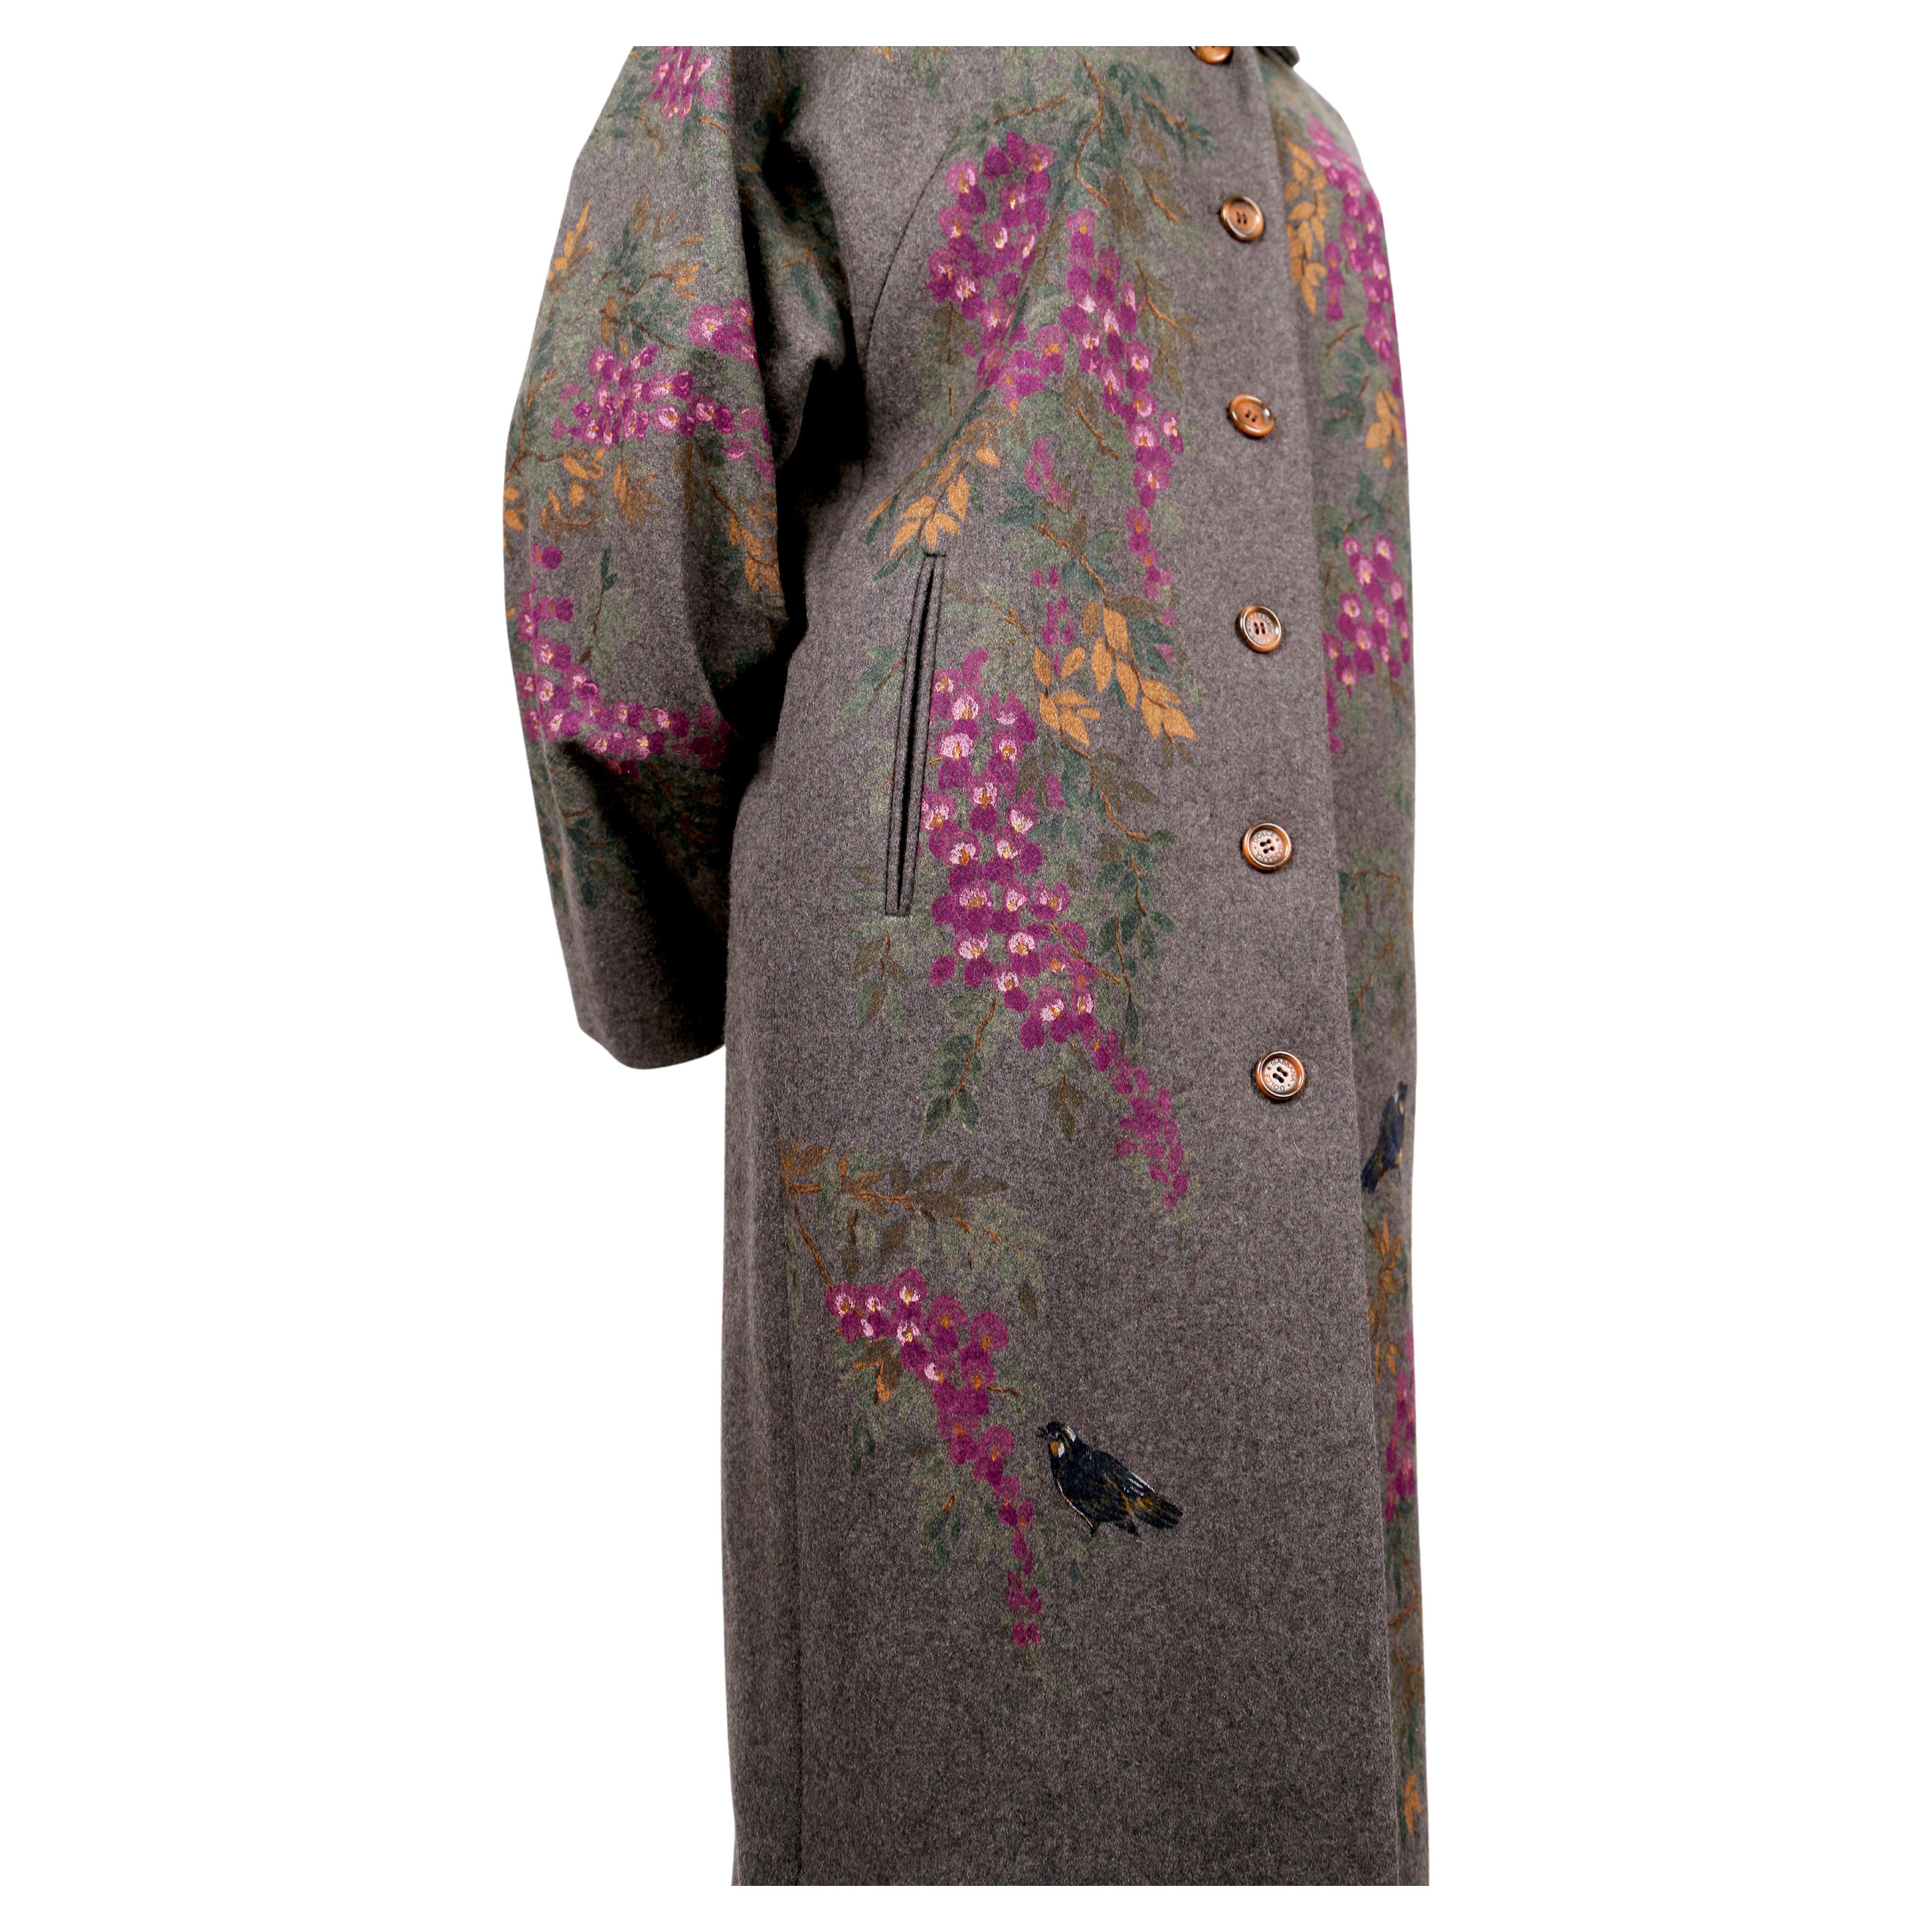 Stunning, hand-painted, heather-grey wool coat with flower and bird motif designed by Dolce & Gabbana dating to fall of 1998. Coat has a 1920's opera coat shape with a notched collar and full 'kimono' style sleeves. Fits slim through the hips. Fully